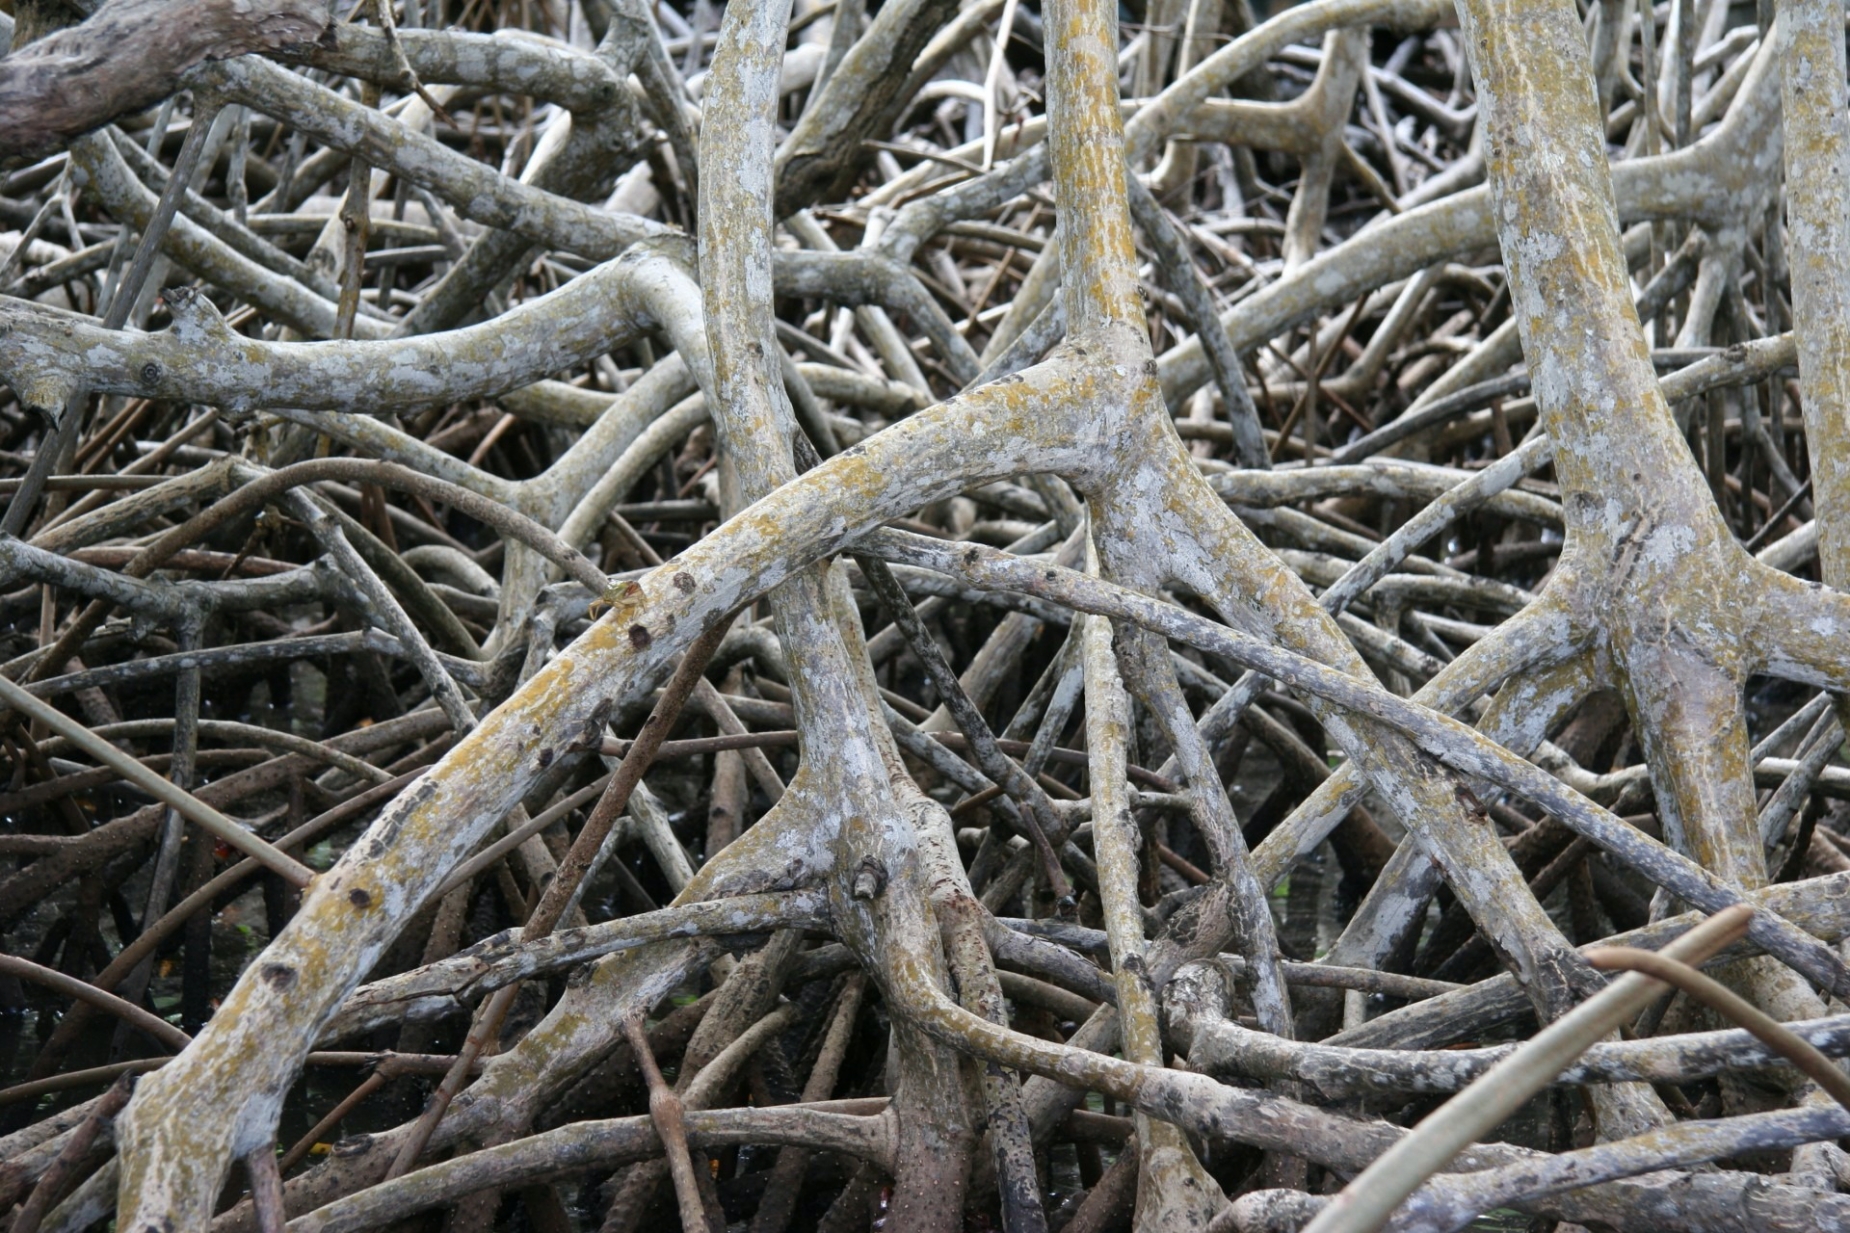 Mangroves can store twice as much carbon on a per-area basis as salt marshes (Source: Colibrispirit/Pixabay)